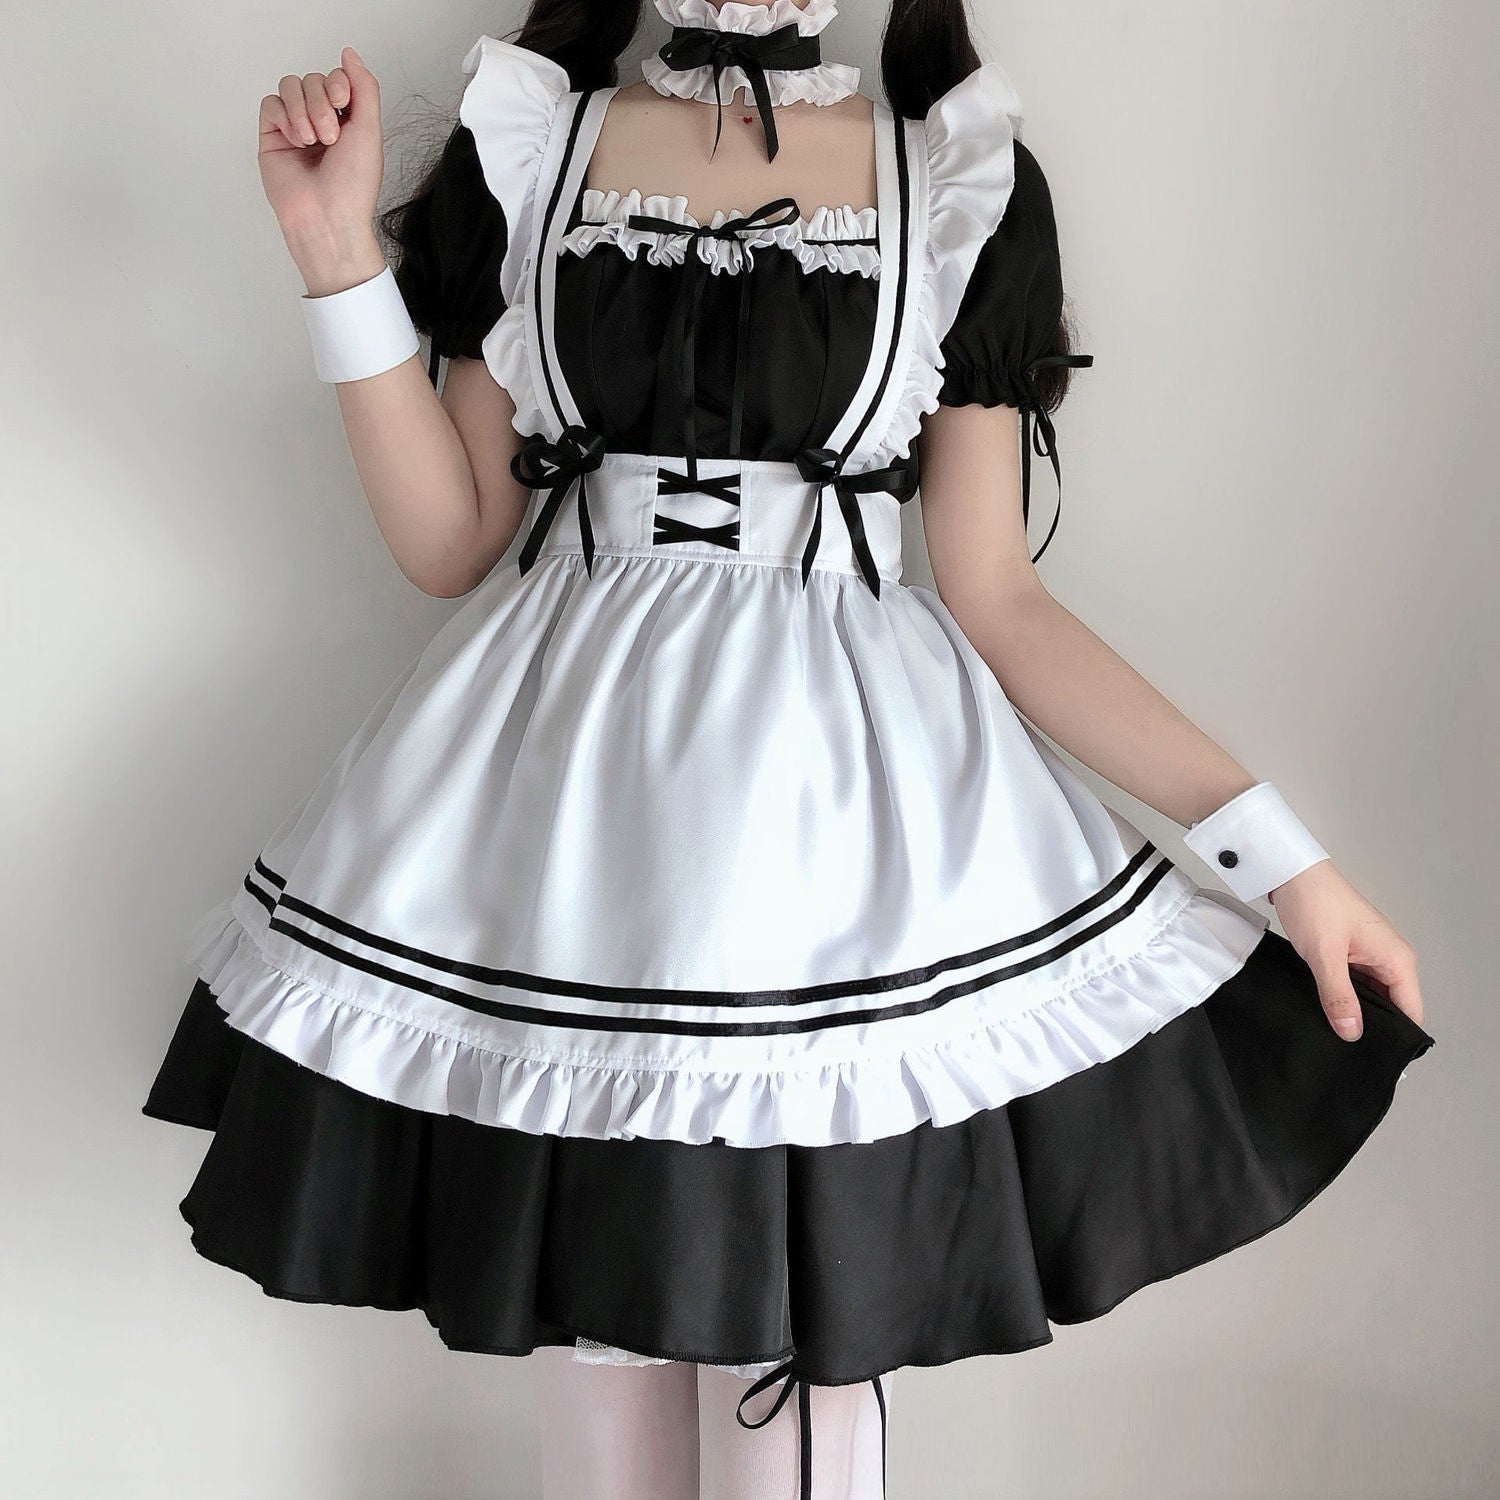 Frilly Maid Dresses